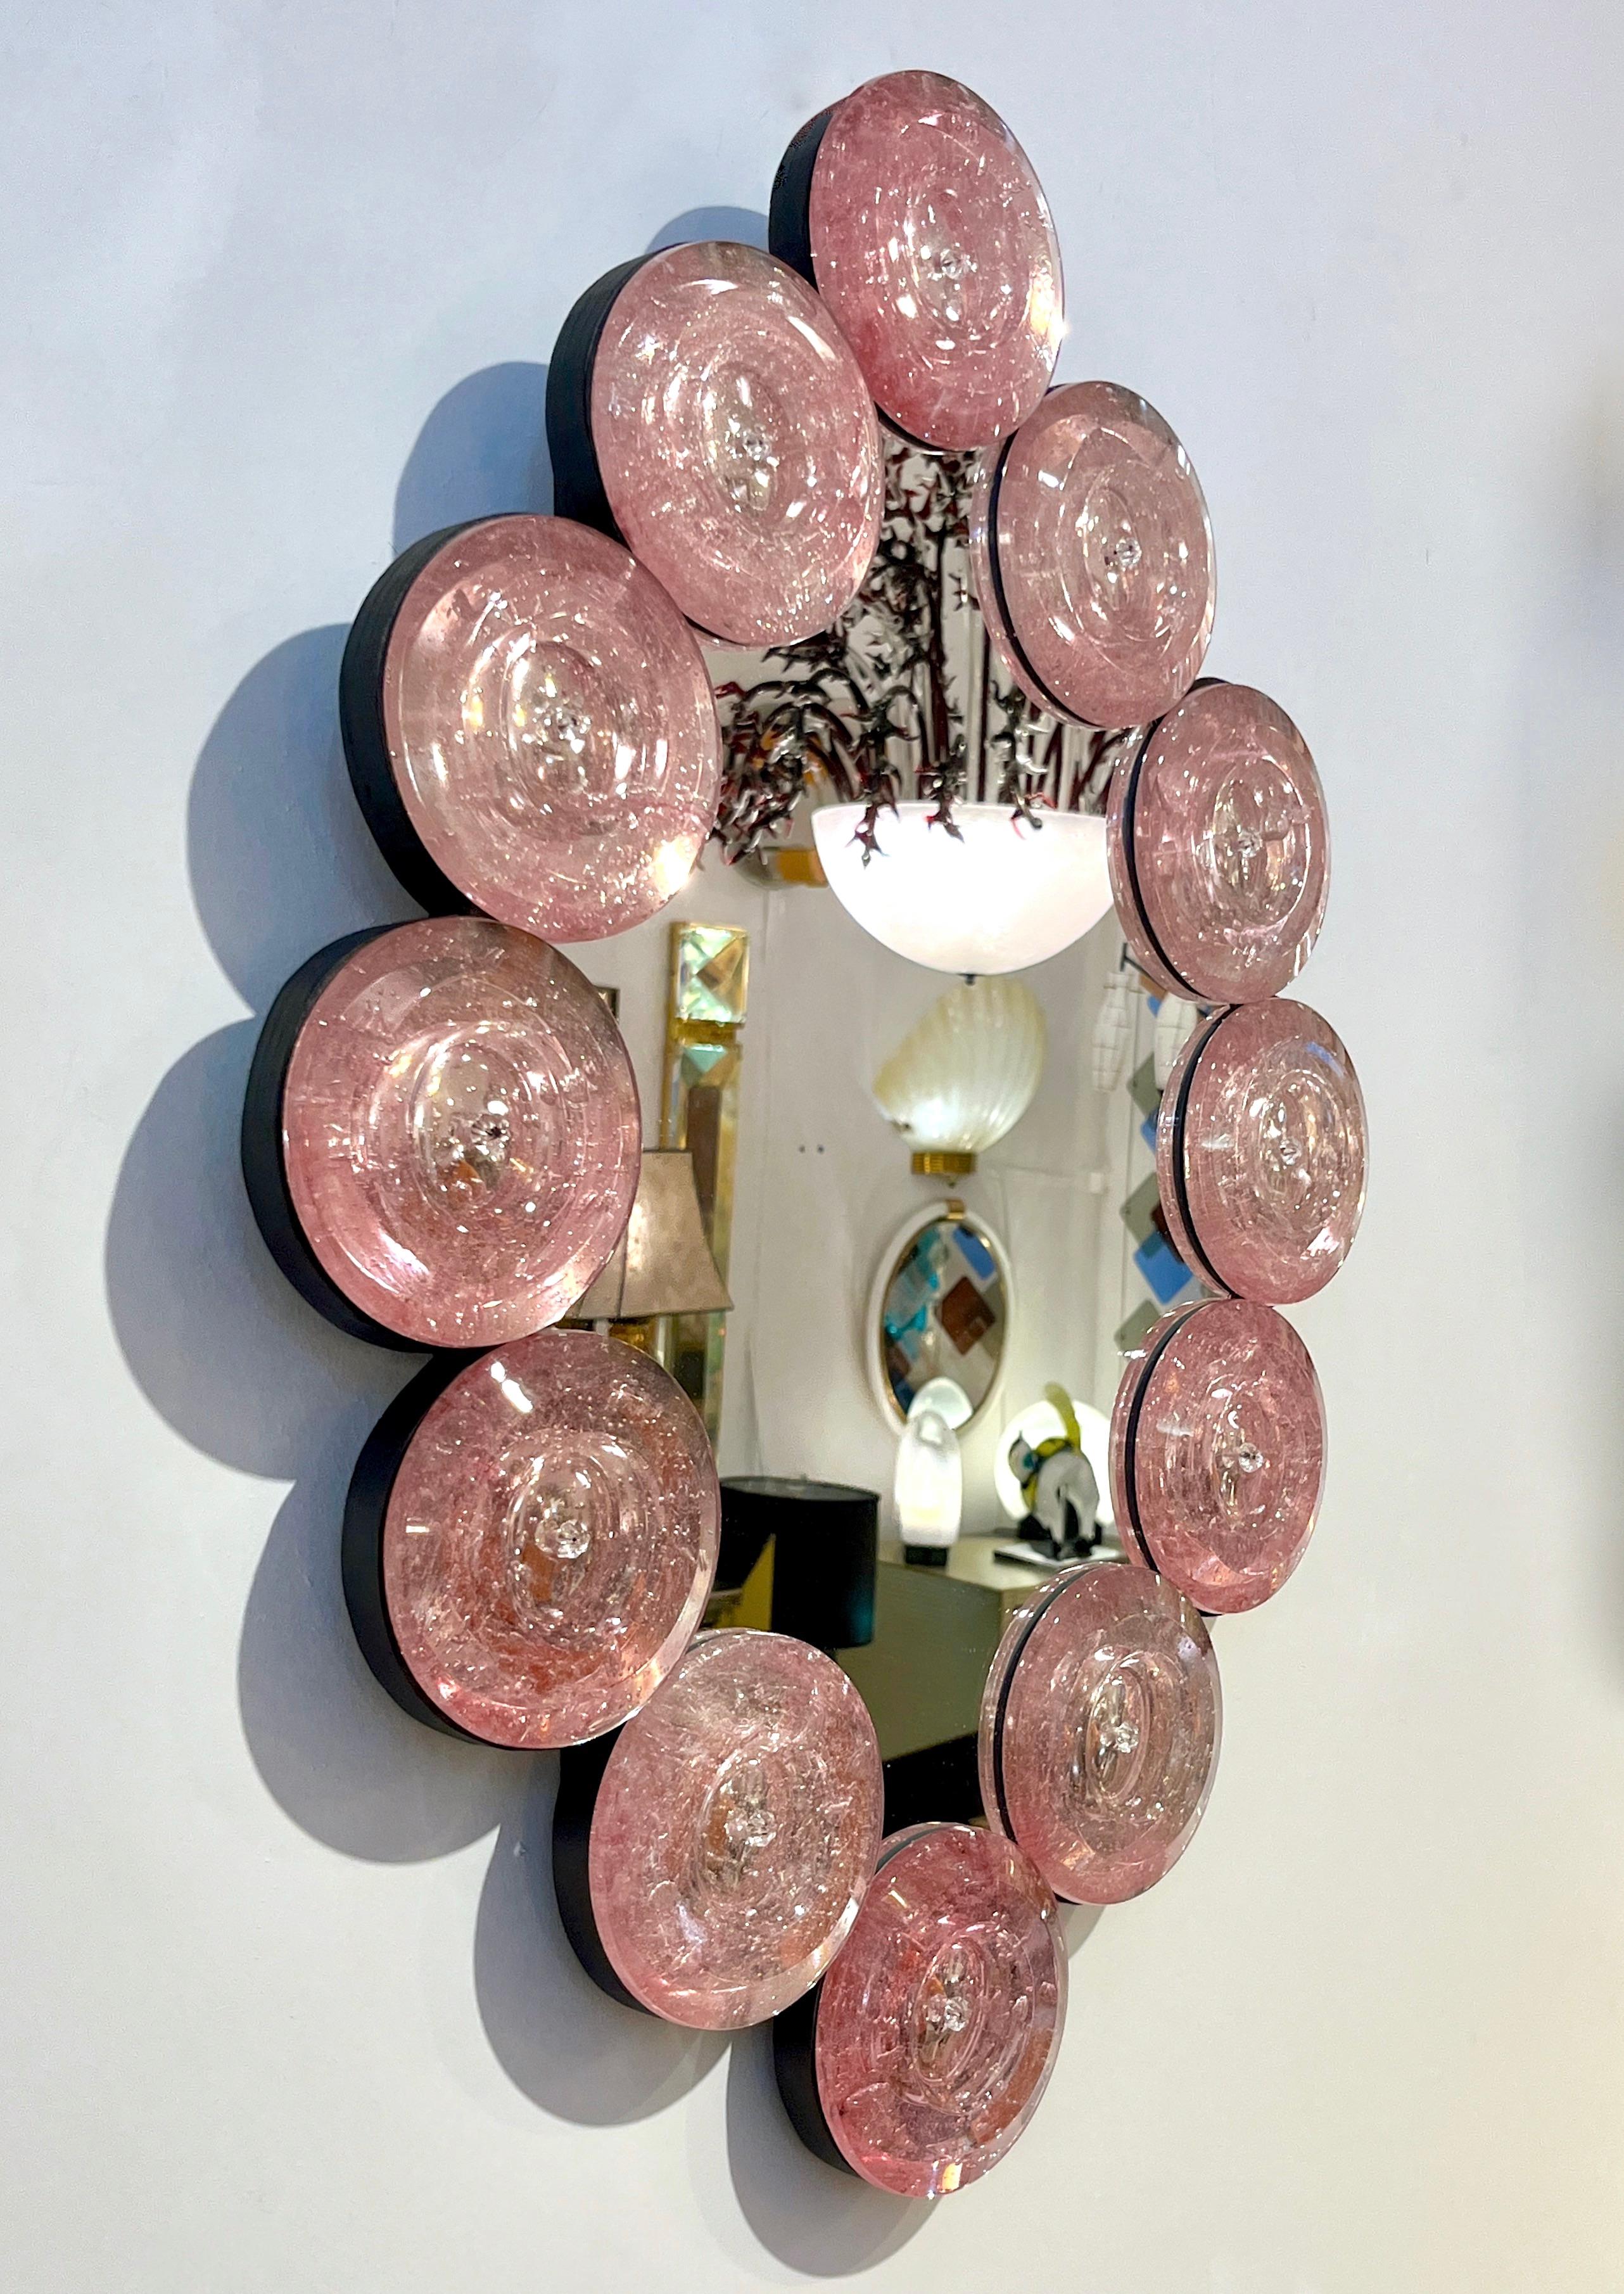 A fun decorative sculpture mirror that brings light and color to your interiors! Contemporary Italian Custom Murano Glass Disk Mirror in a modern oval tear-drop shape Design, vertical or horizontal. The mirror frame is composed of 12 Murano glass